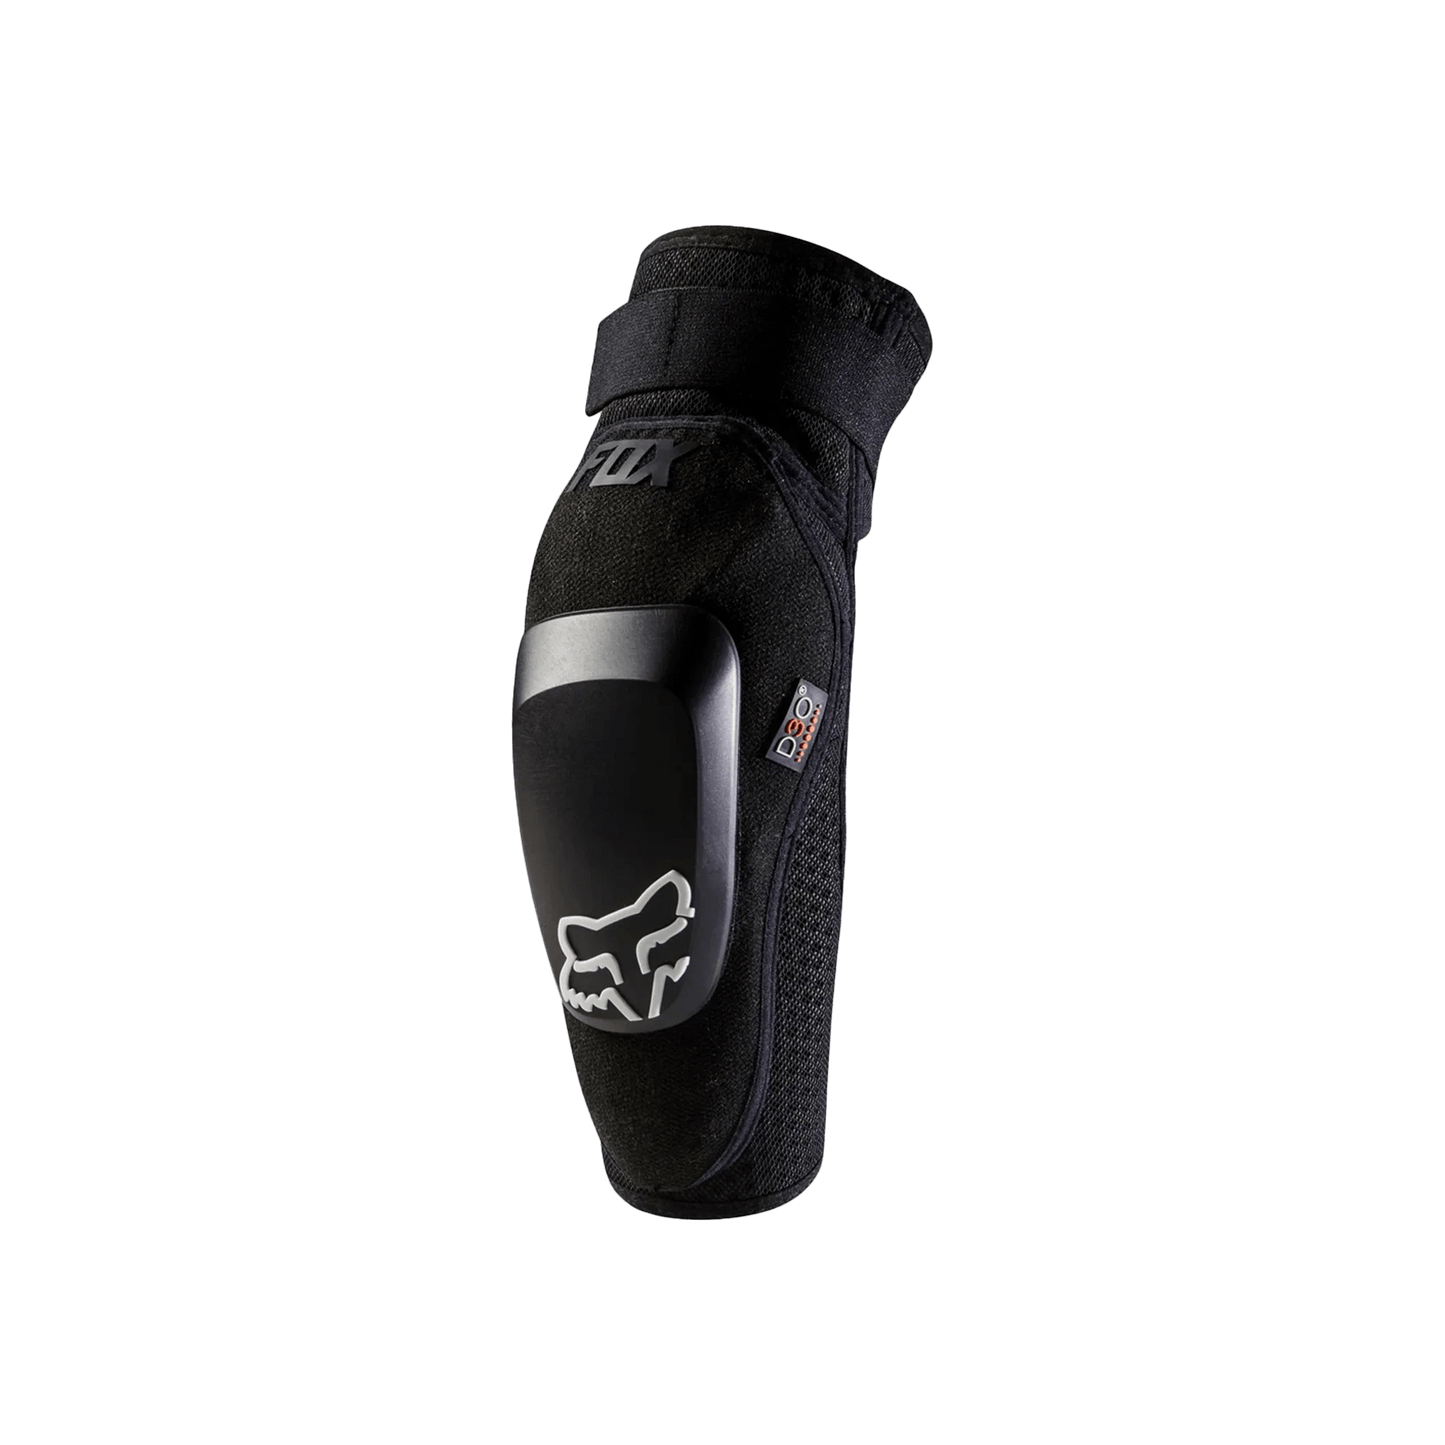 Ride One Fox Racing Launch Pro D30 Elbow Guard